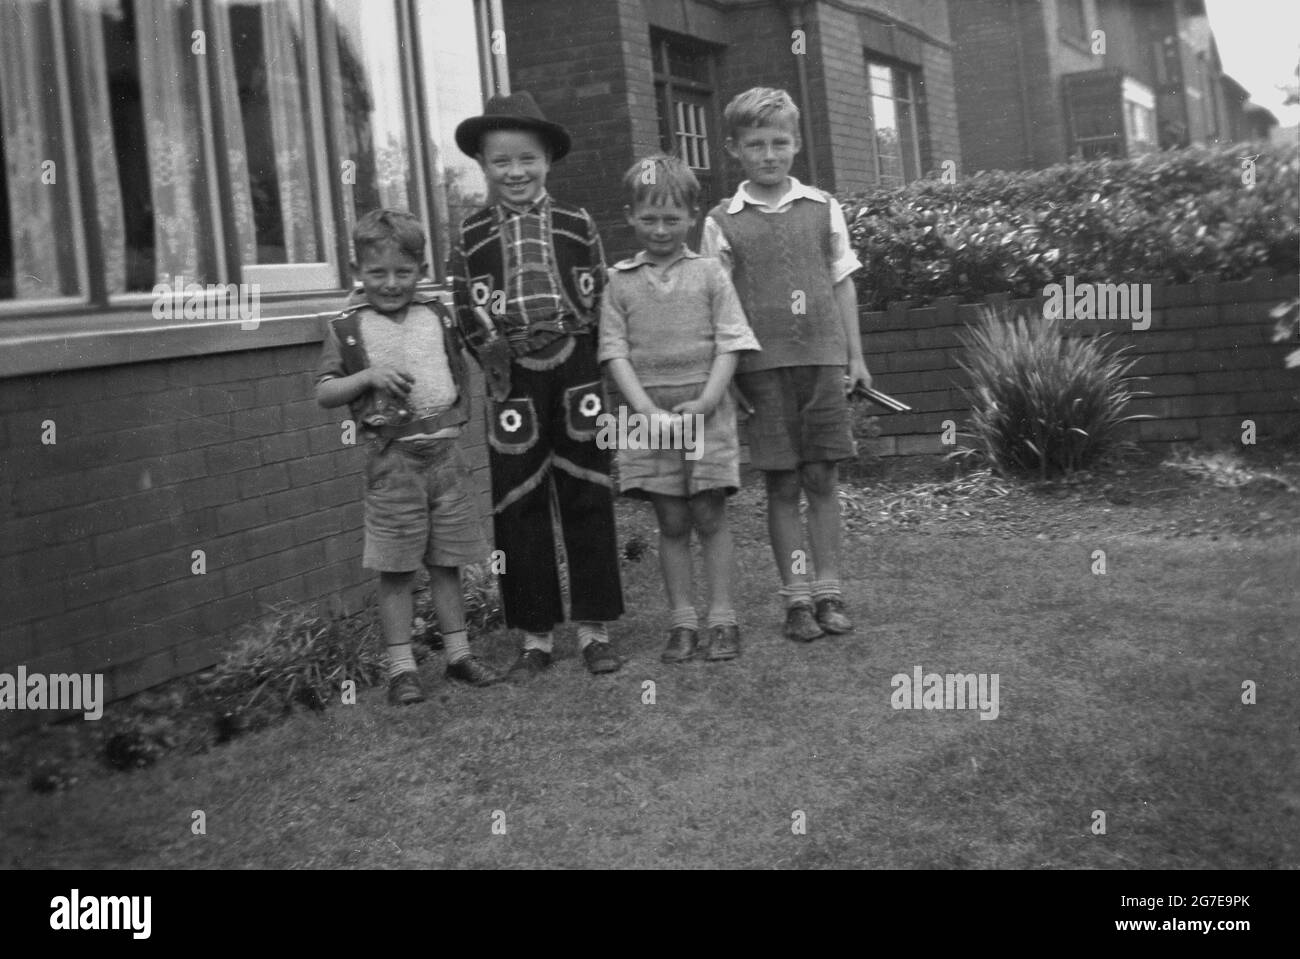 1930s, historical, four young boys standing together  in a front garden outside a house for a photo, one of the youngsters dressed in a cowboy outfit, the others all in short trousers, Mirfield, Yorkshire, England, UK. Stock Photo